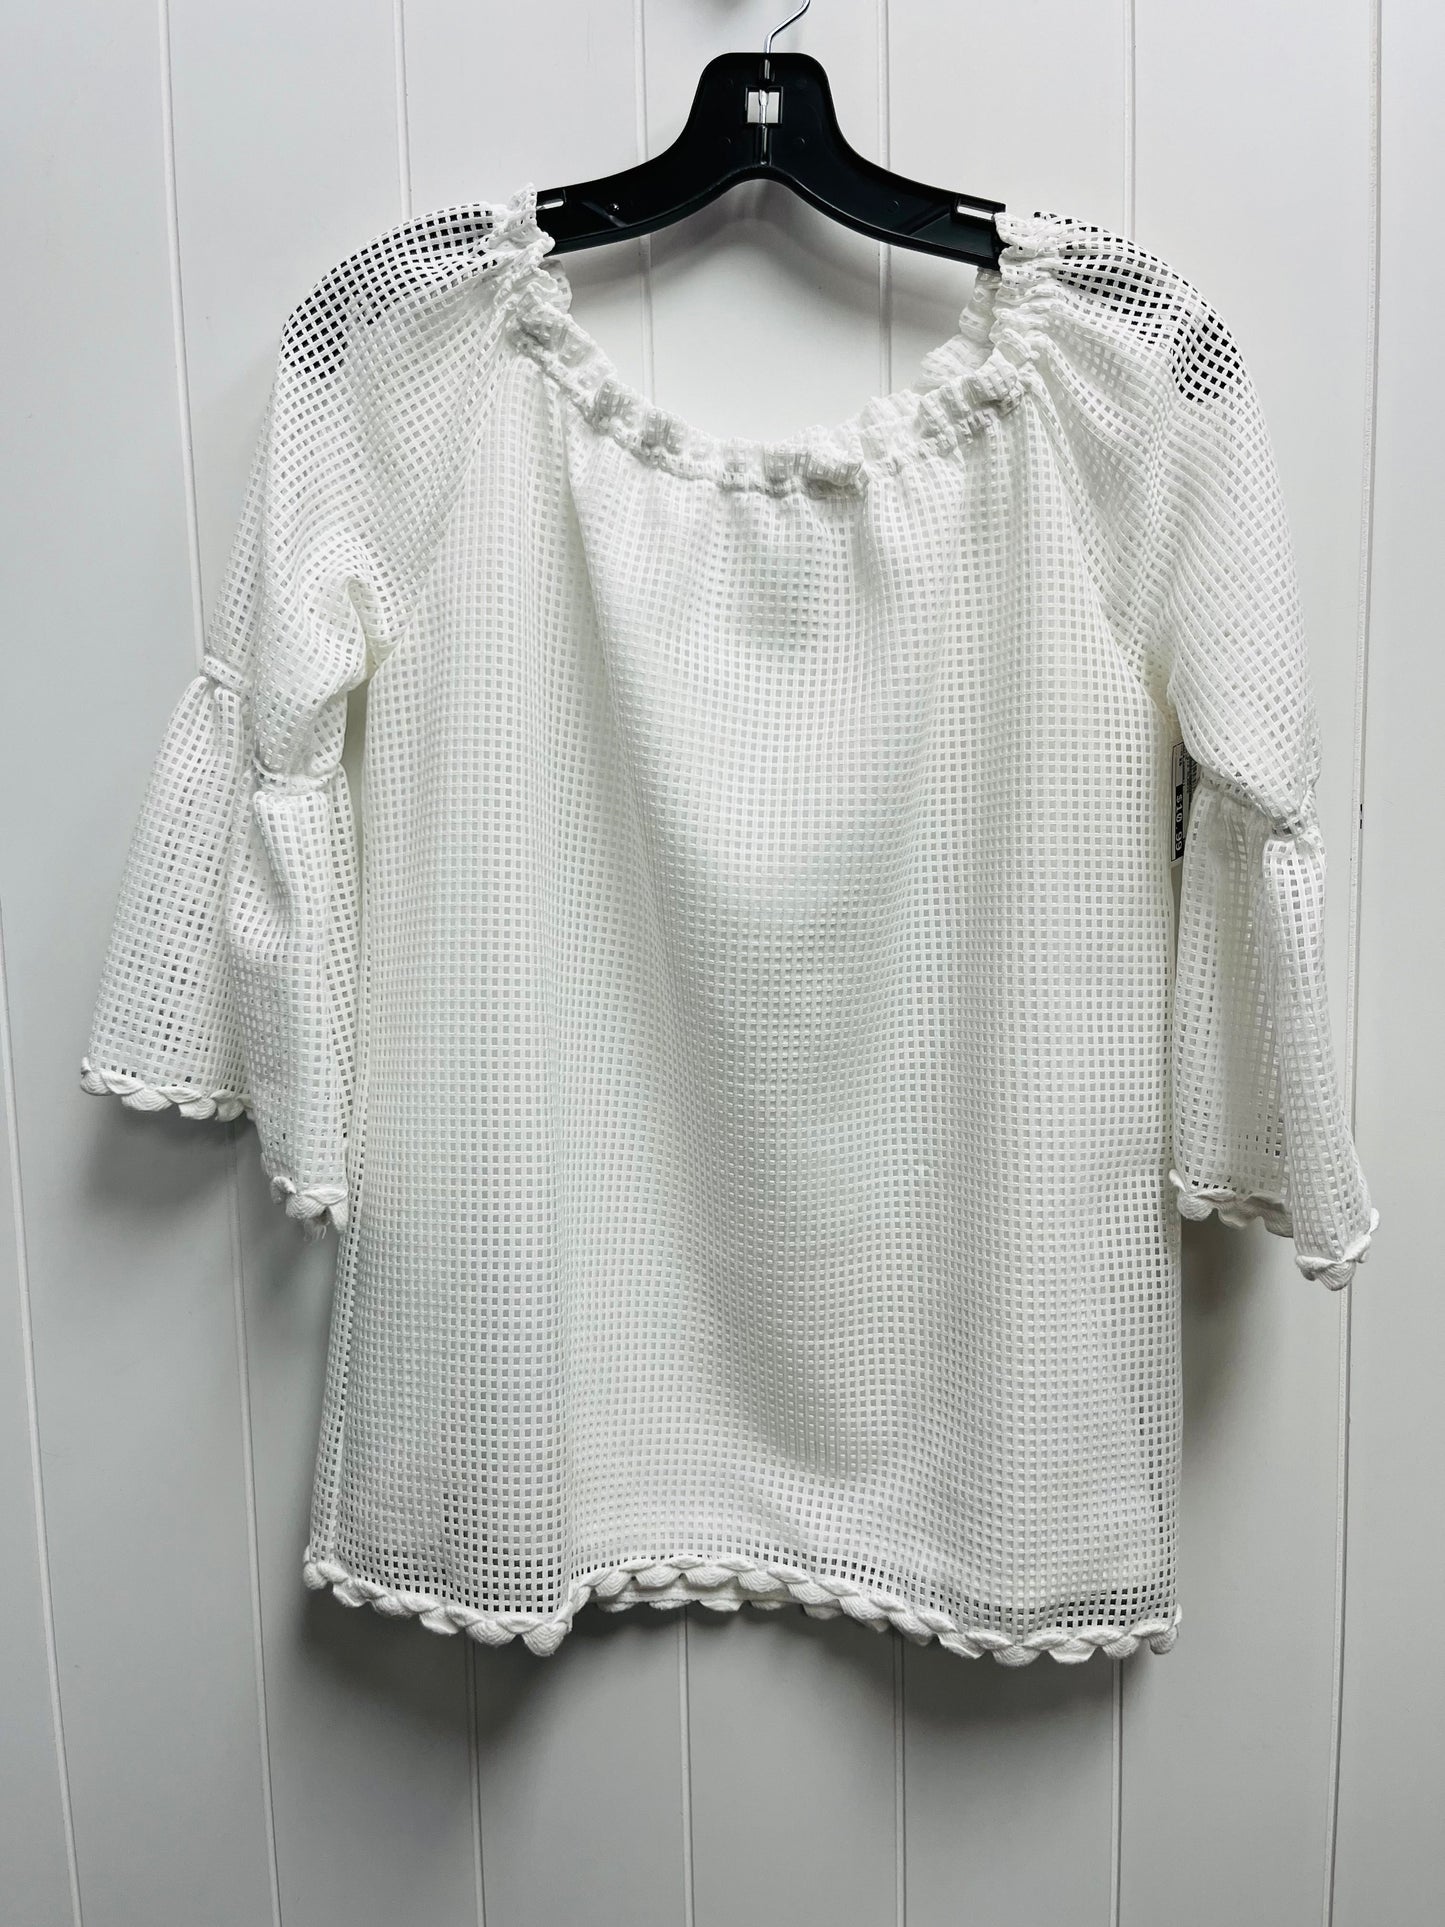 White Top 3/4 Sleeve sara campbell, Size Xs